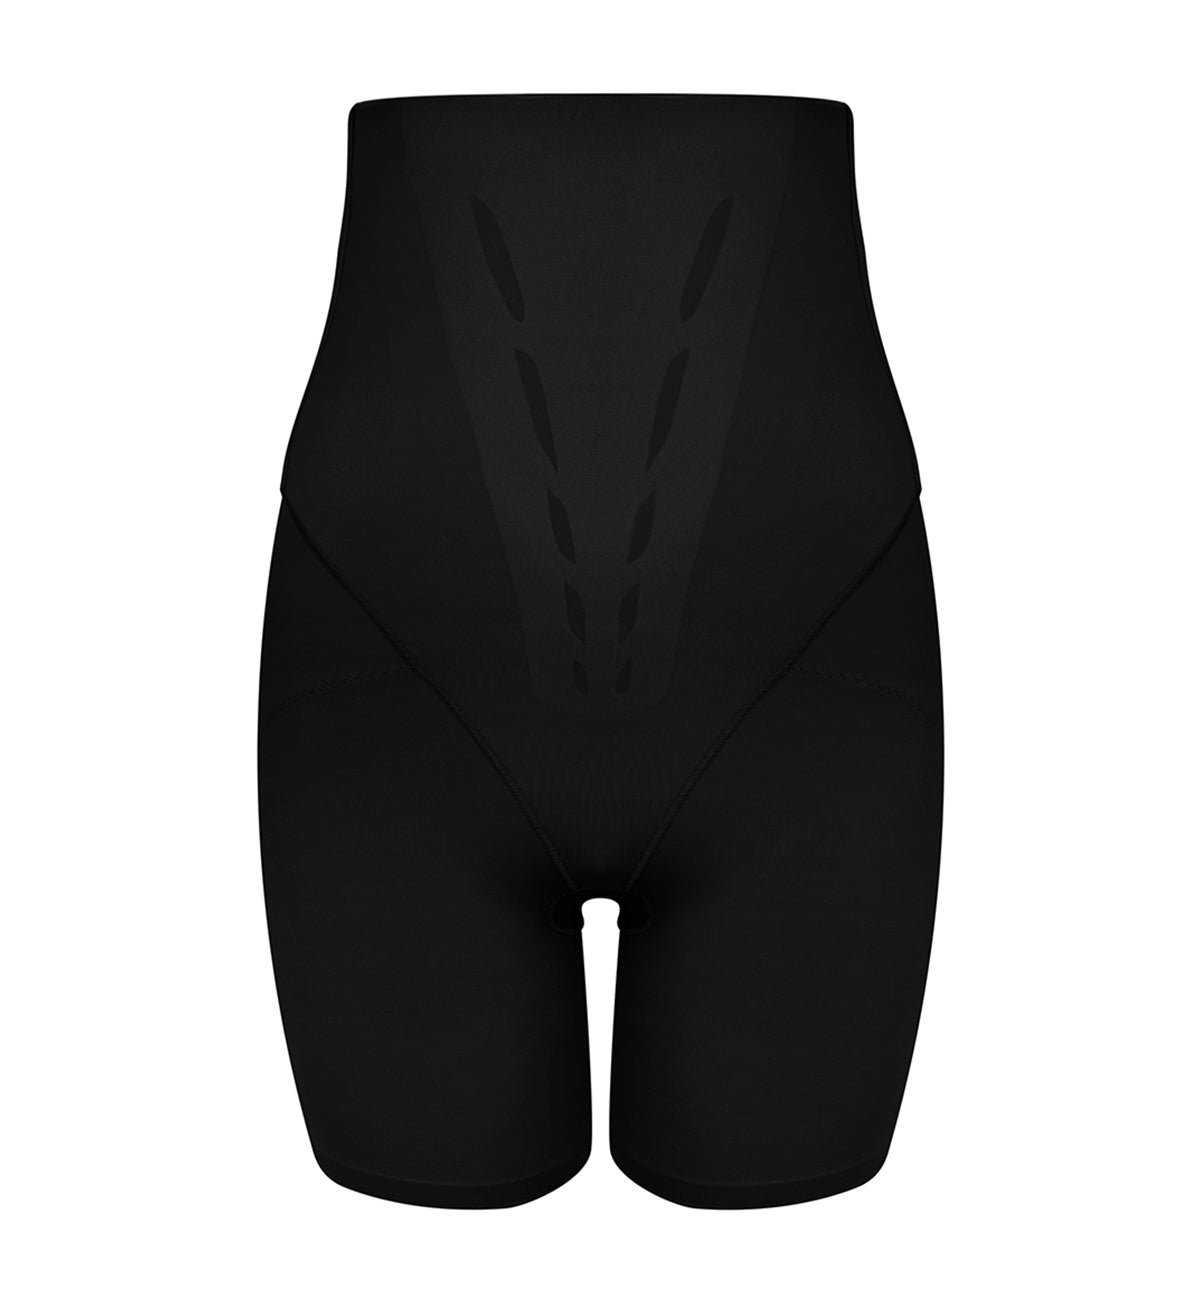 Tomkot women's 12 Hour shapewear - extremely lightweight & comfortable  Shaper - Black Shapewear that targets the waist